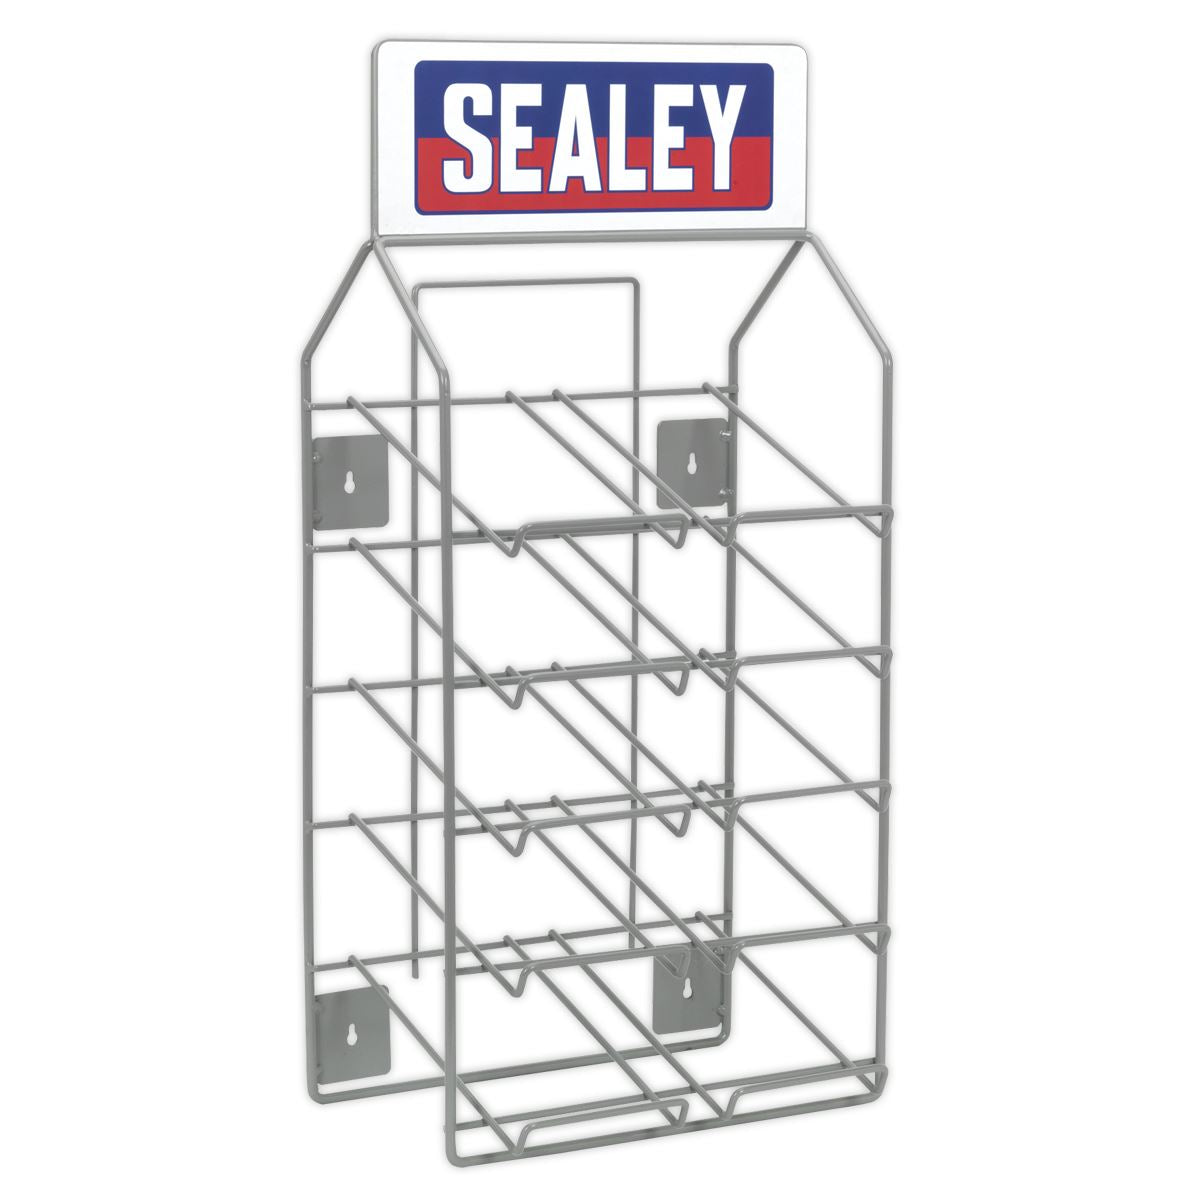 Sealey Sealey Display Stand - Assortment Boxes